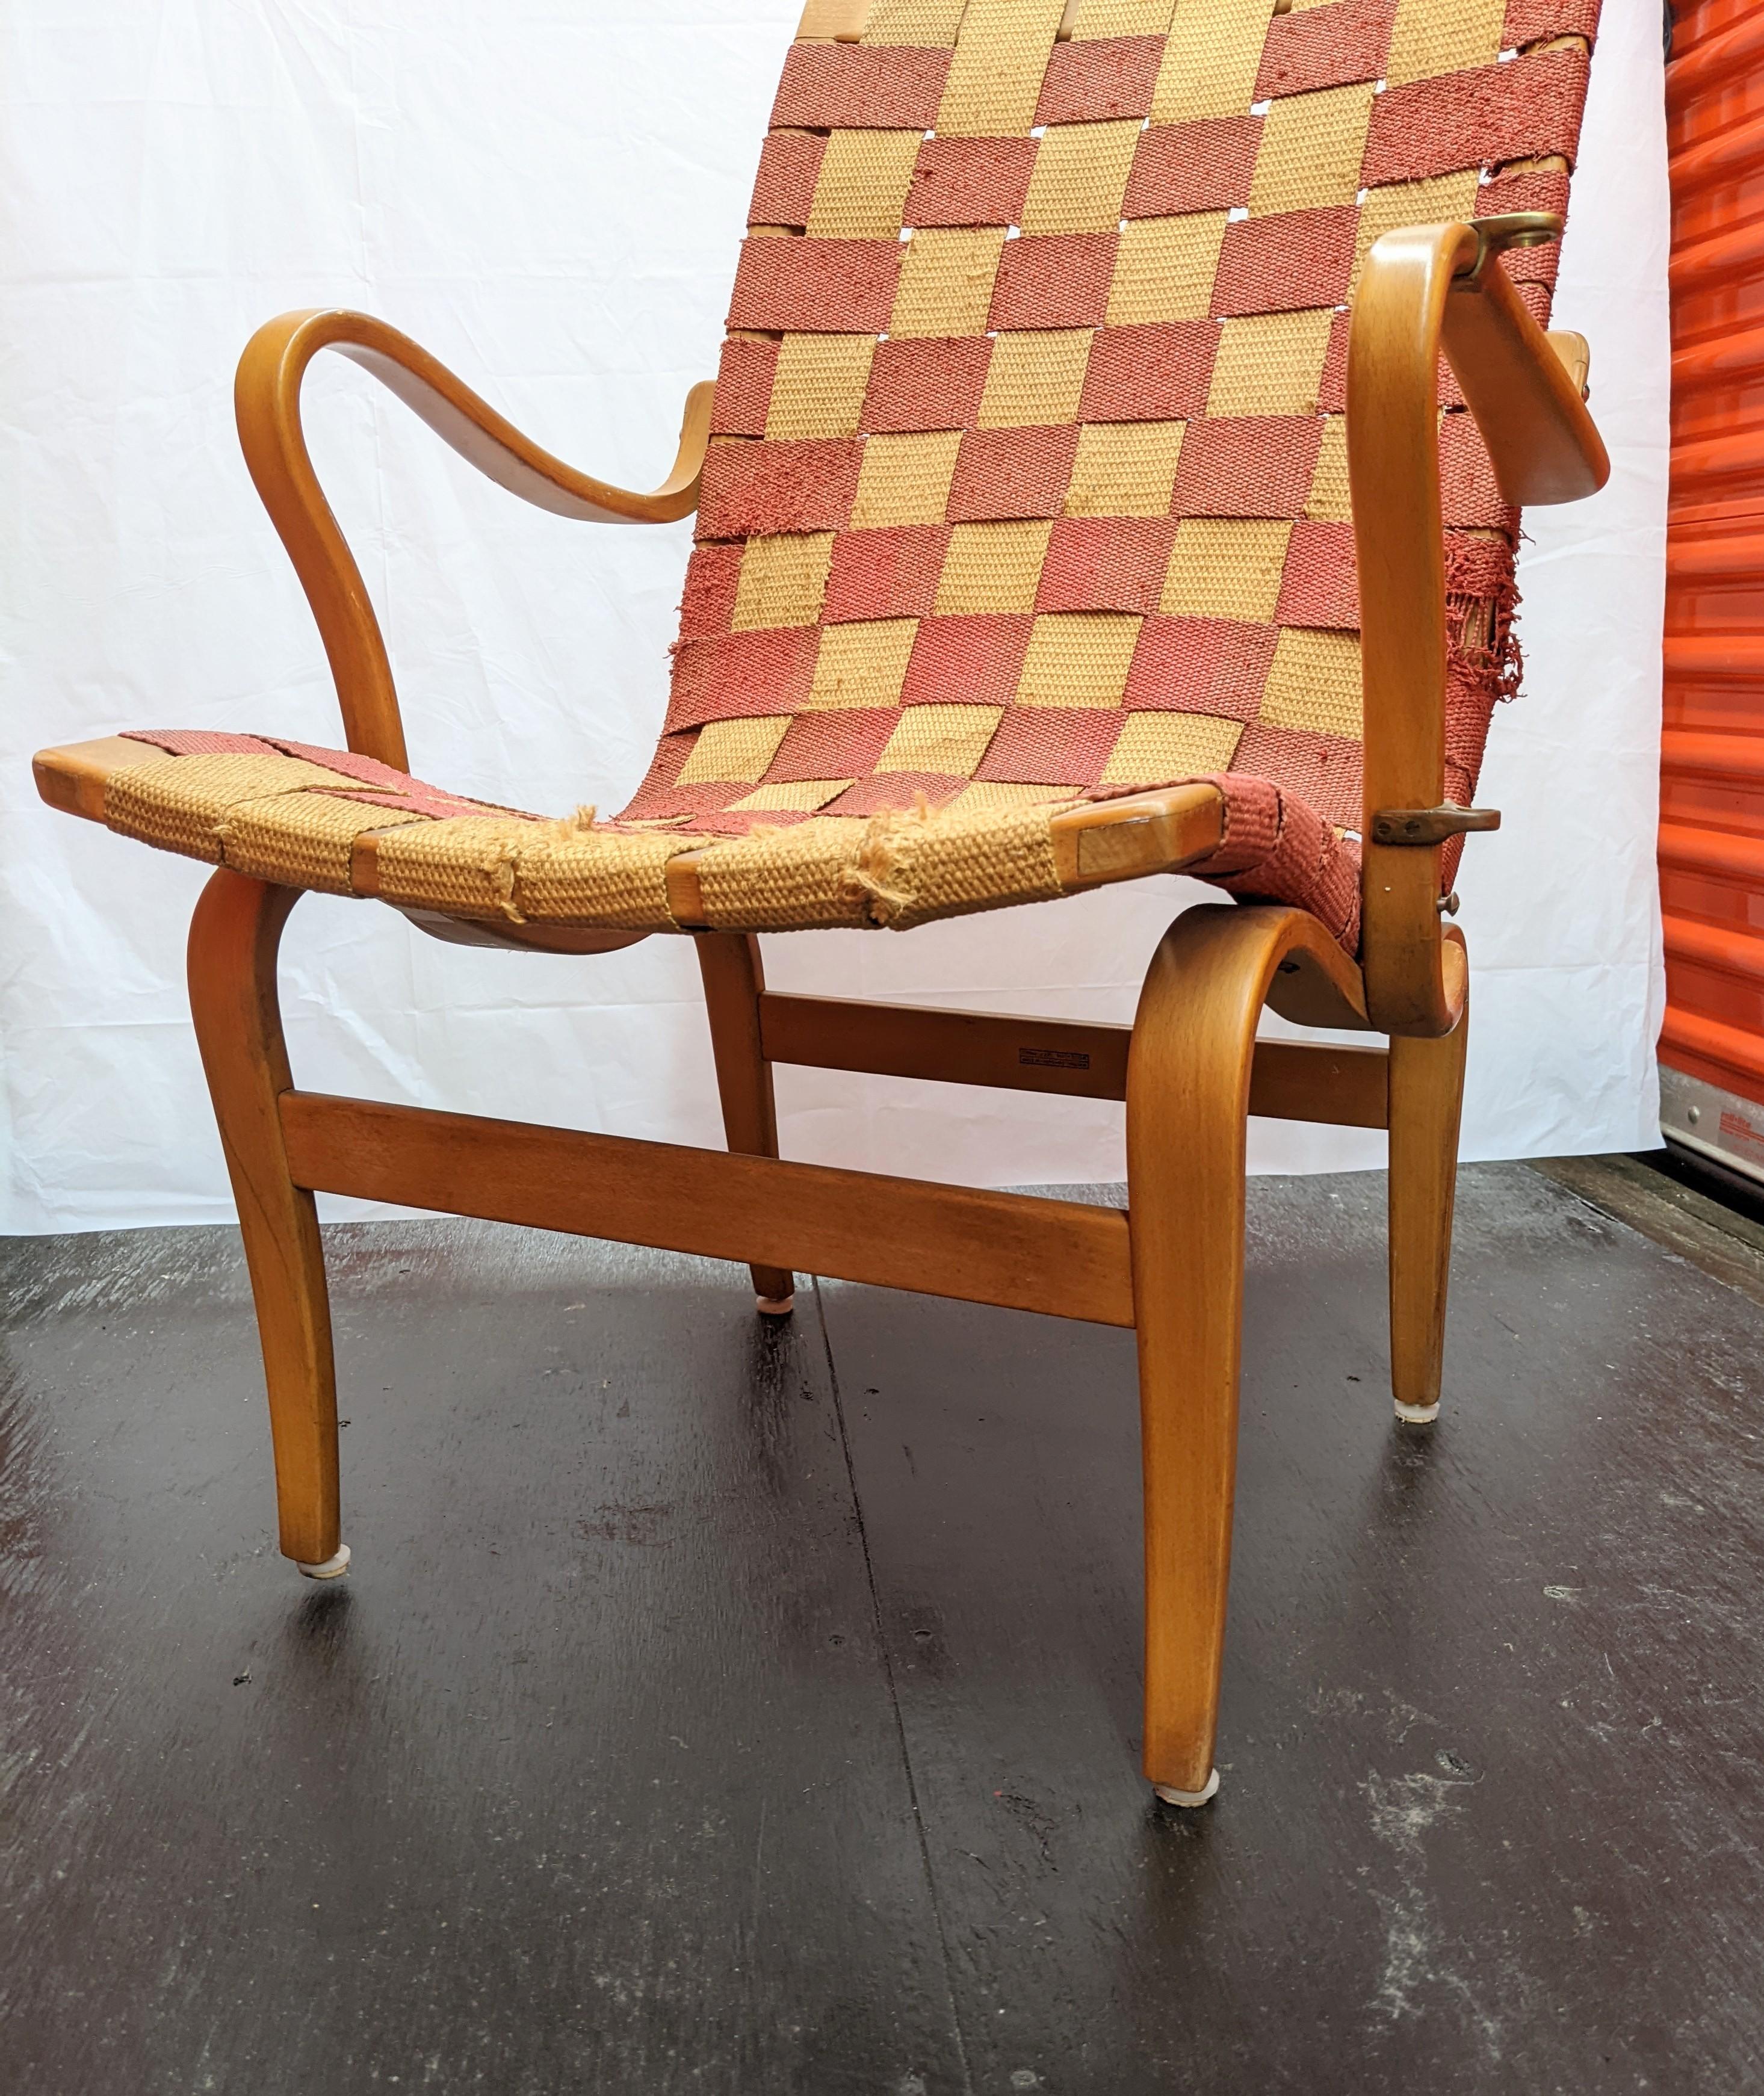 Bruno Mathsson reading chair, originally designed in 1934 in laminated beech bent wood with linen webbing. This later version has original webbing and is in worn original condition. Wood reading tray is missing but hardware is attached to arm rest.